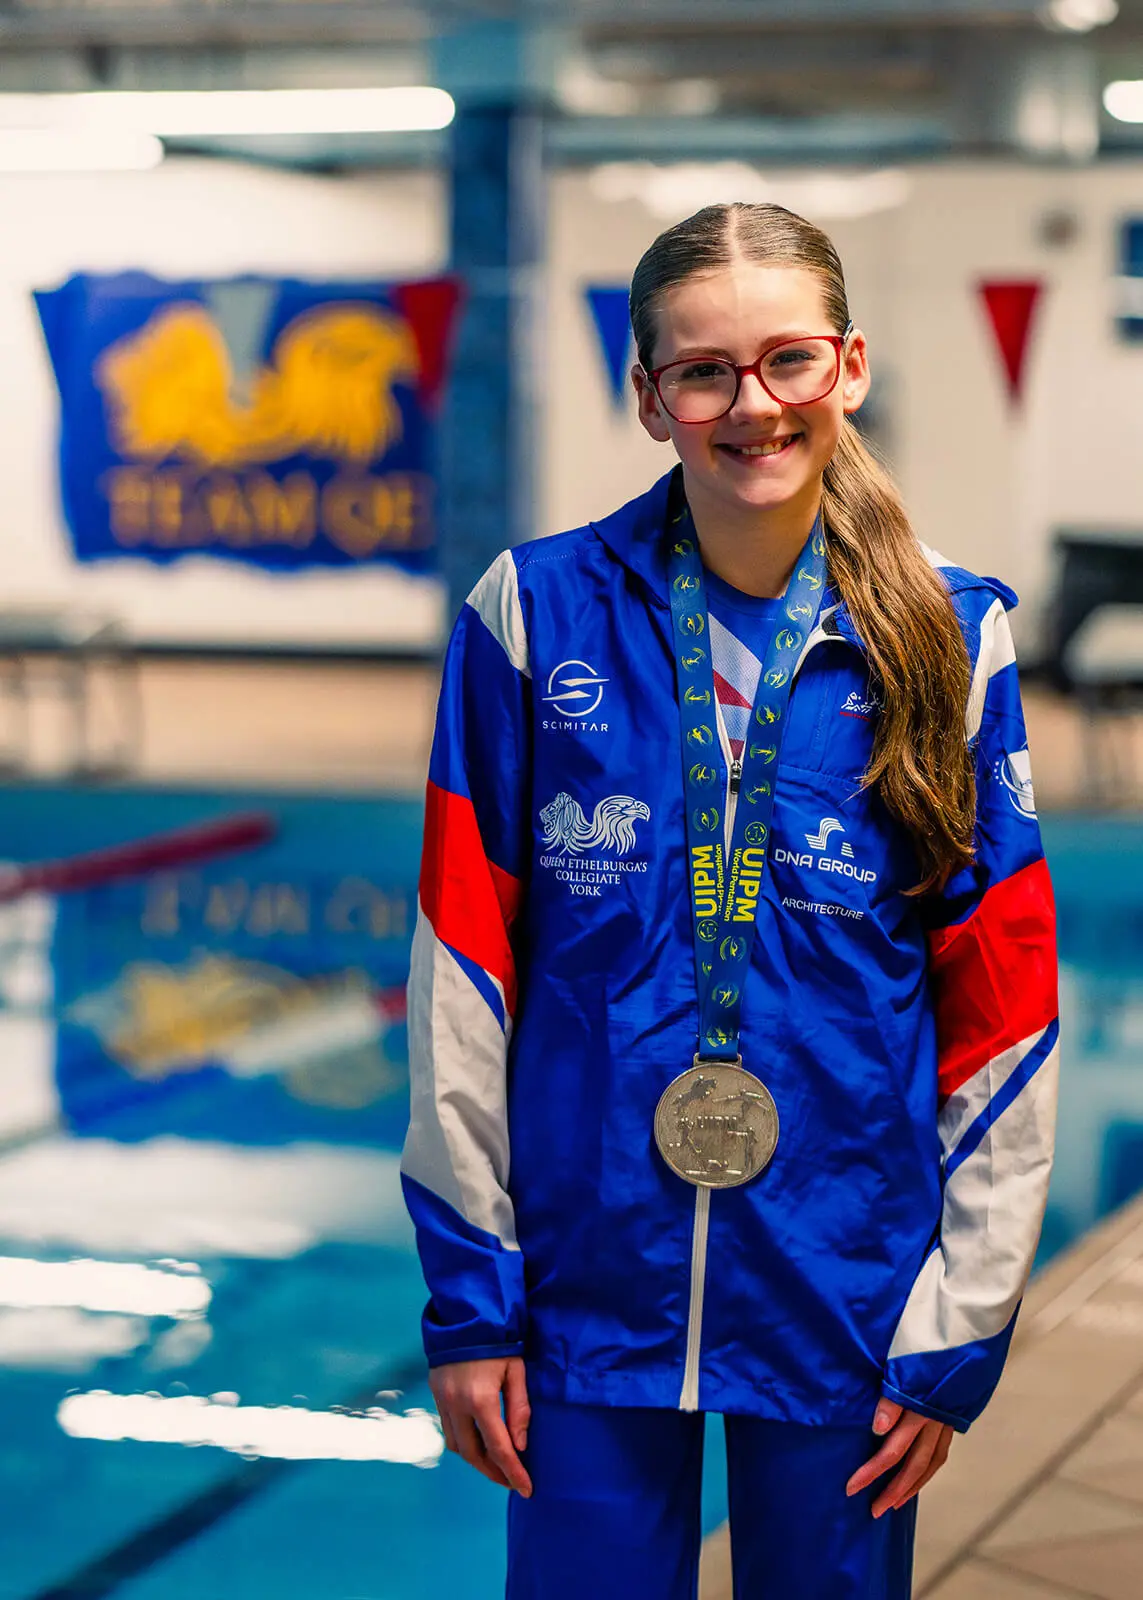 A Key Stage 3 King's Magna student celebrating her competitive swimming success